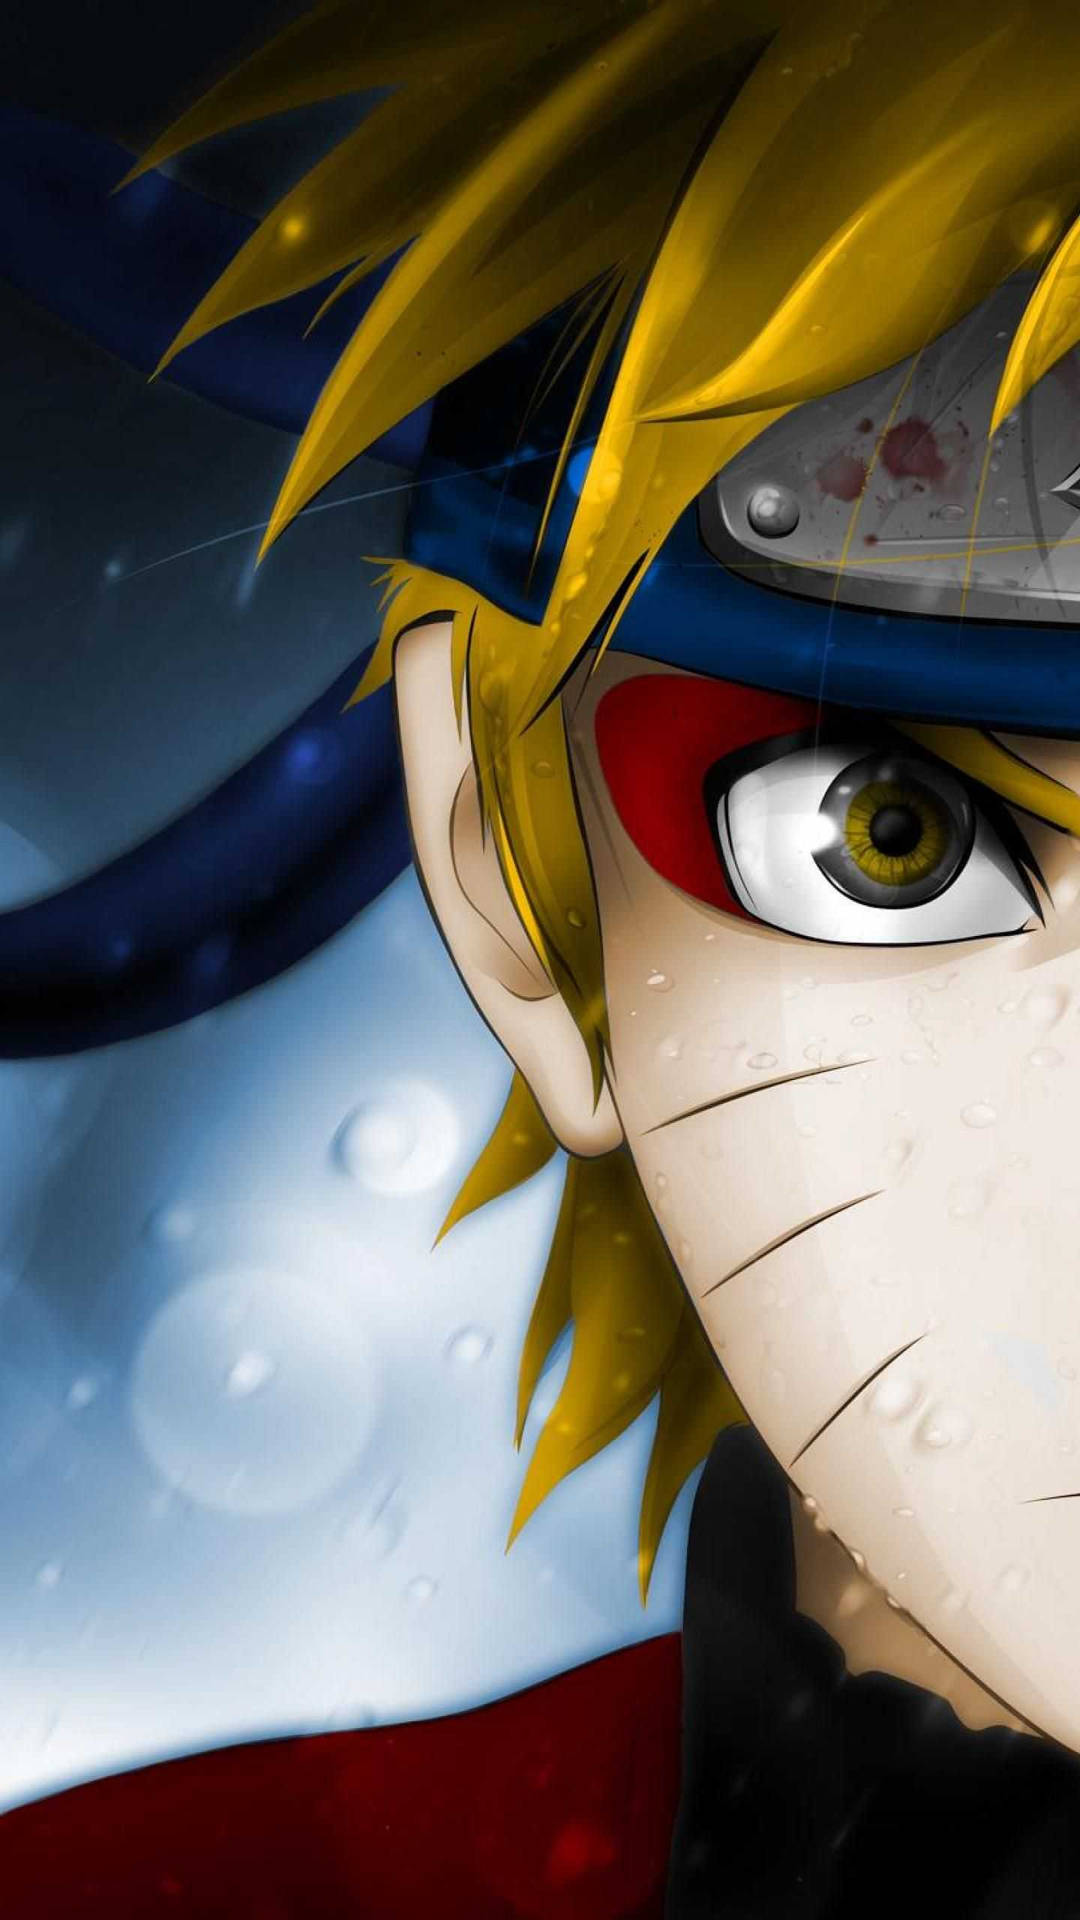 Free Naruto Iphone Wallpaper Downloads, [200+] Naruto Iphone Wallpapers for  FREE 